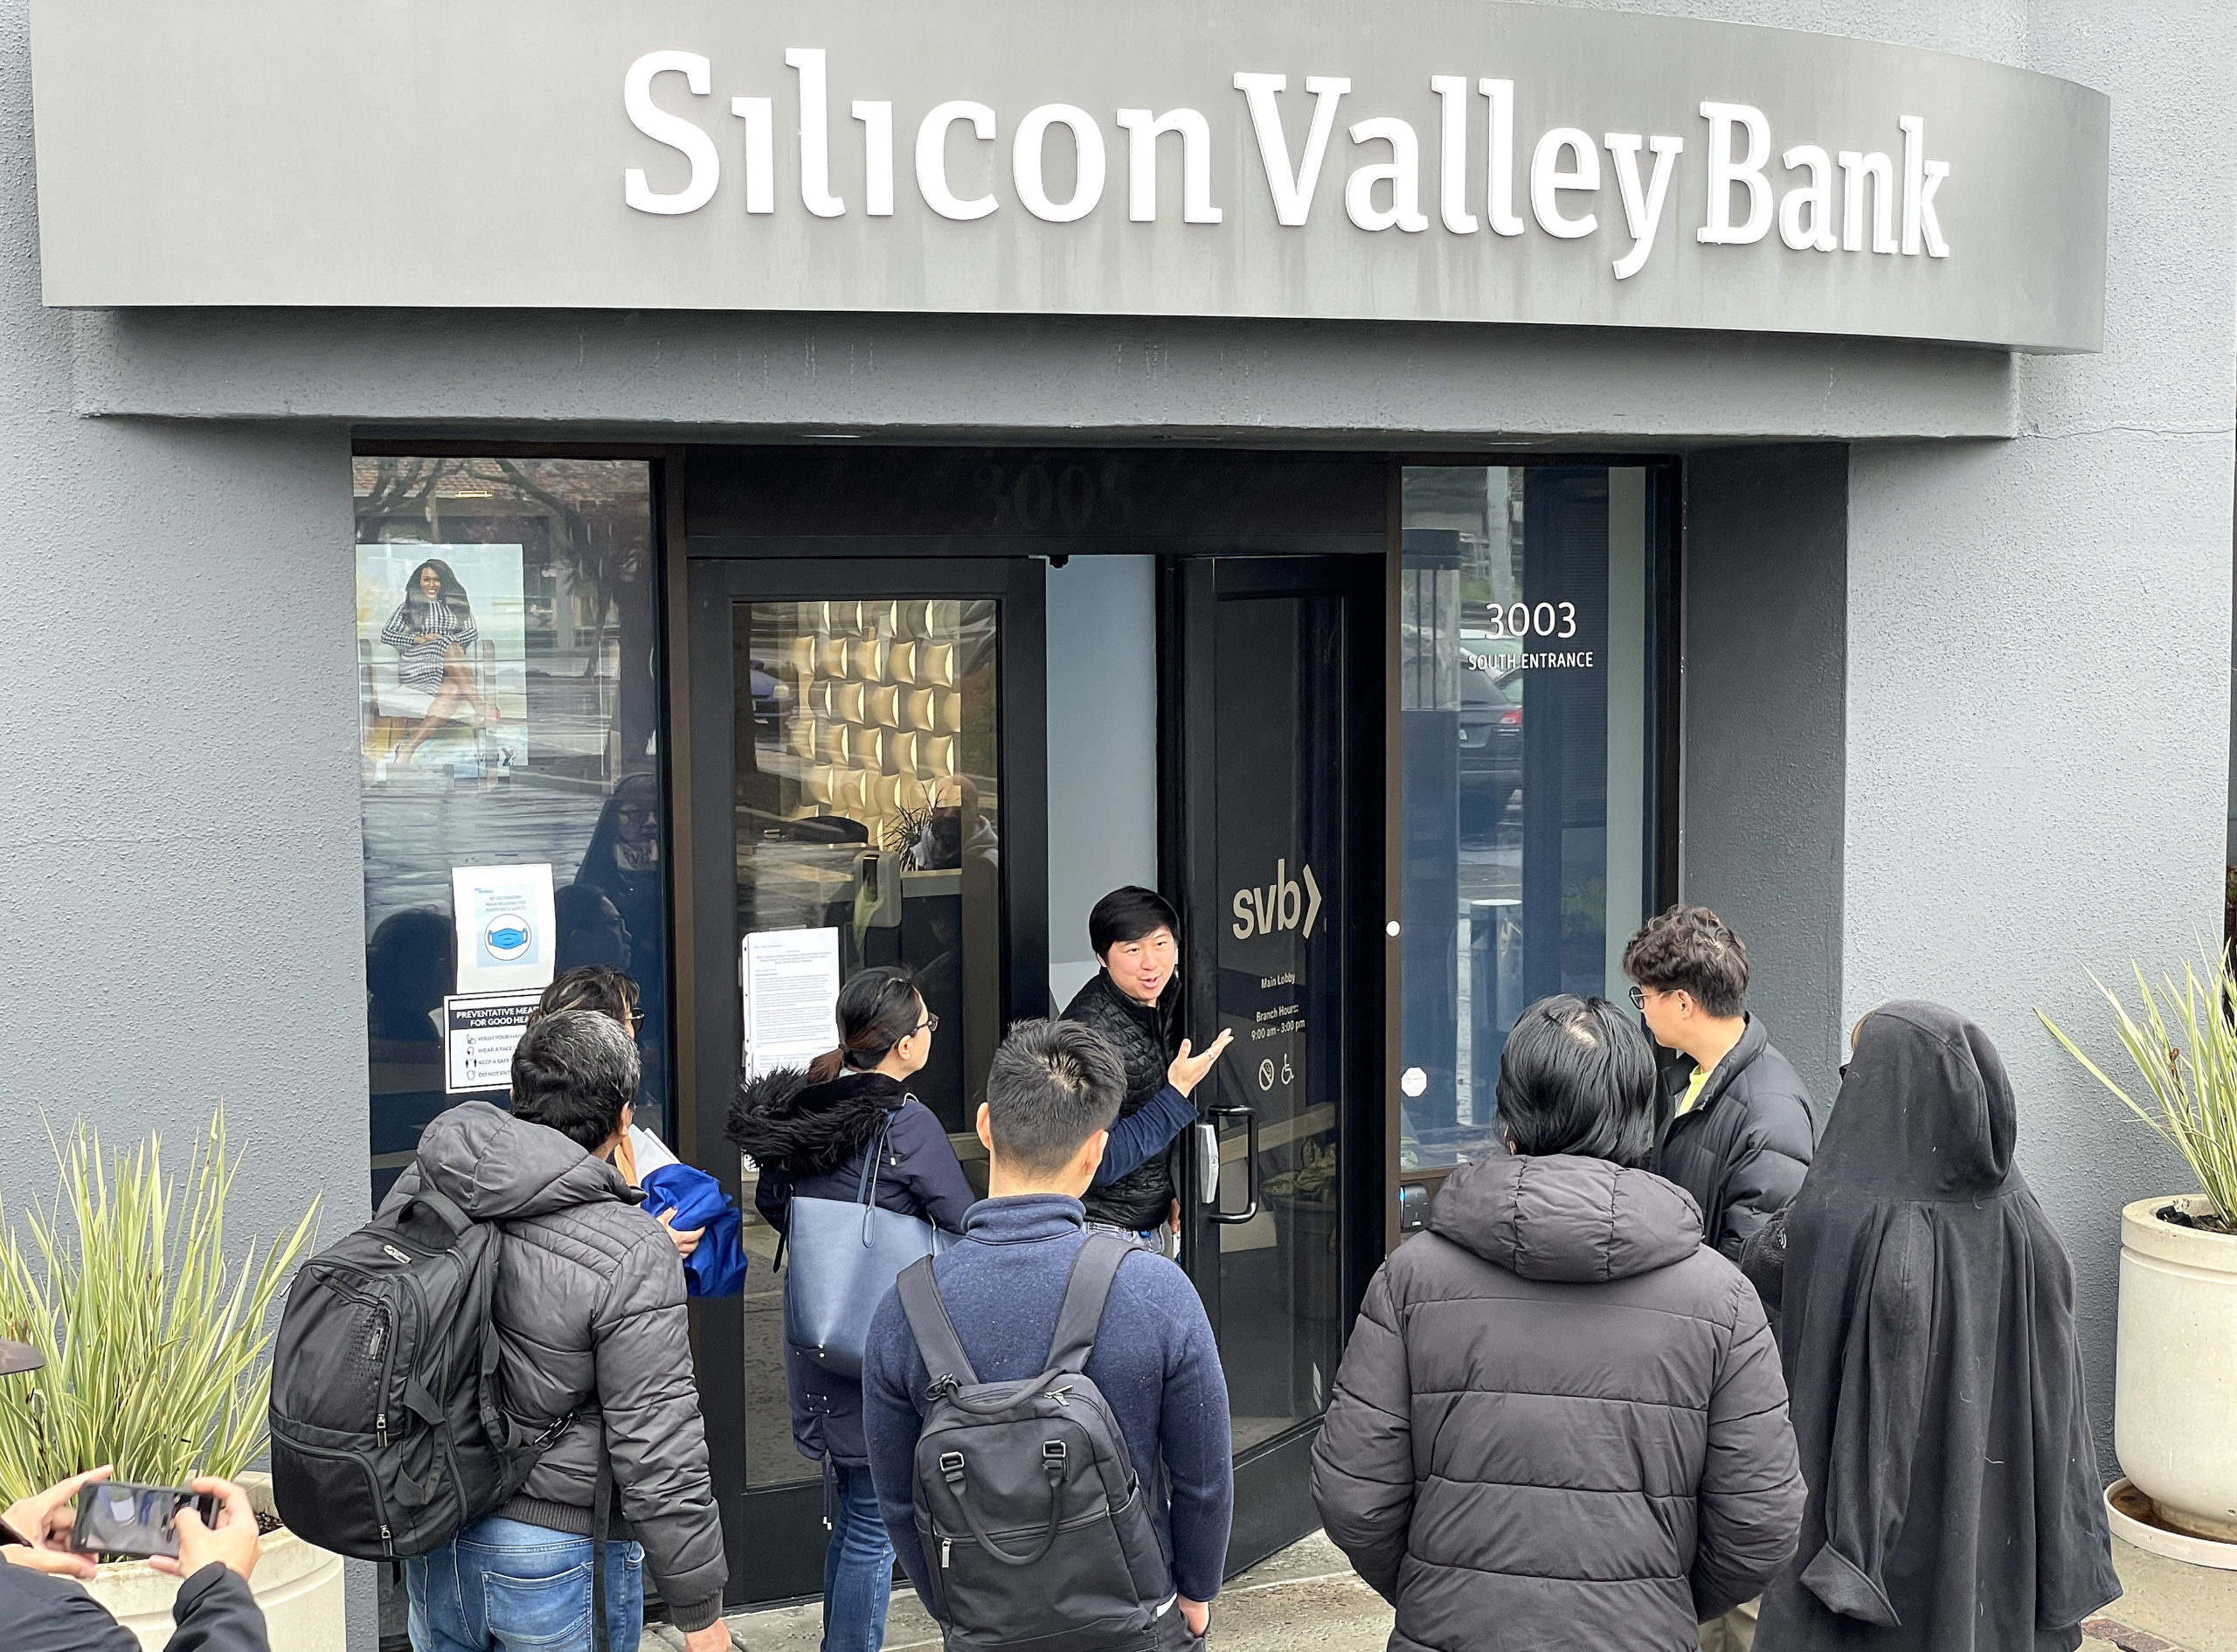 SANTA CLARA, CALIFORNIA - MARCH 10: A worker (C) tells people that the Silicon Valley Bank (SVB) headquarters is closed on March 10, 2023 in Santa Clara, California. (Photo by Justin Sullivan/Getty Images)